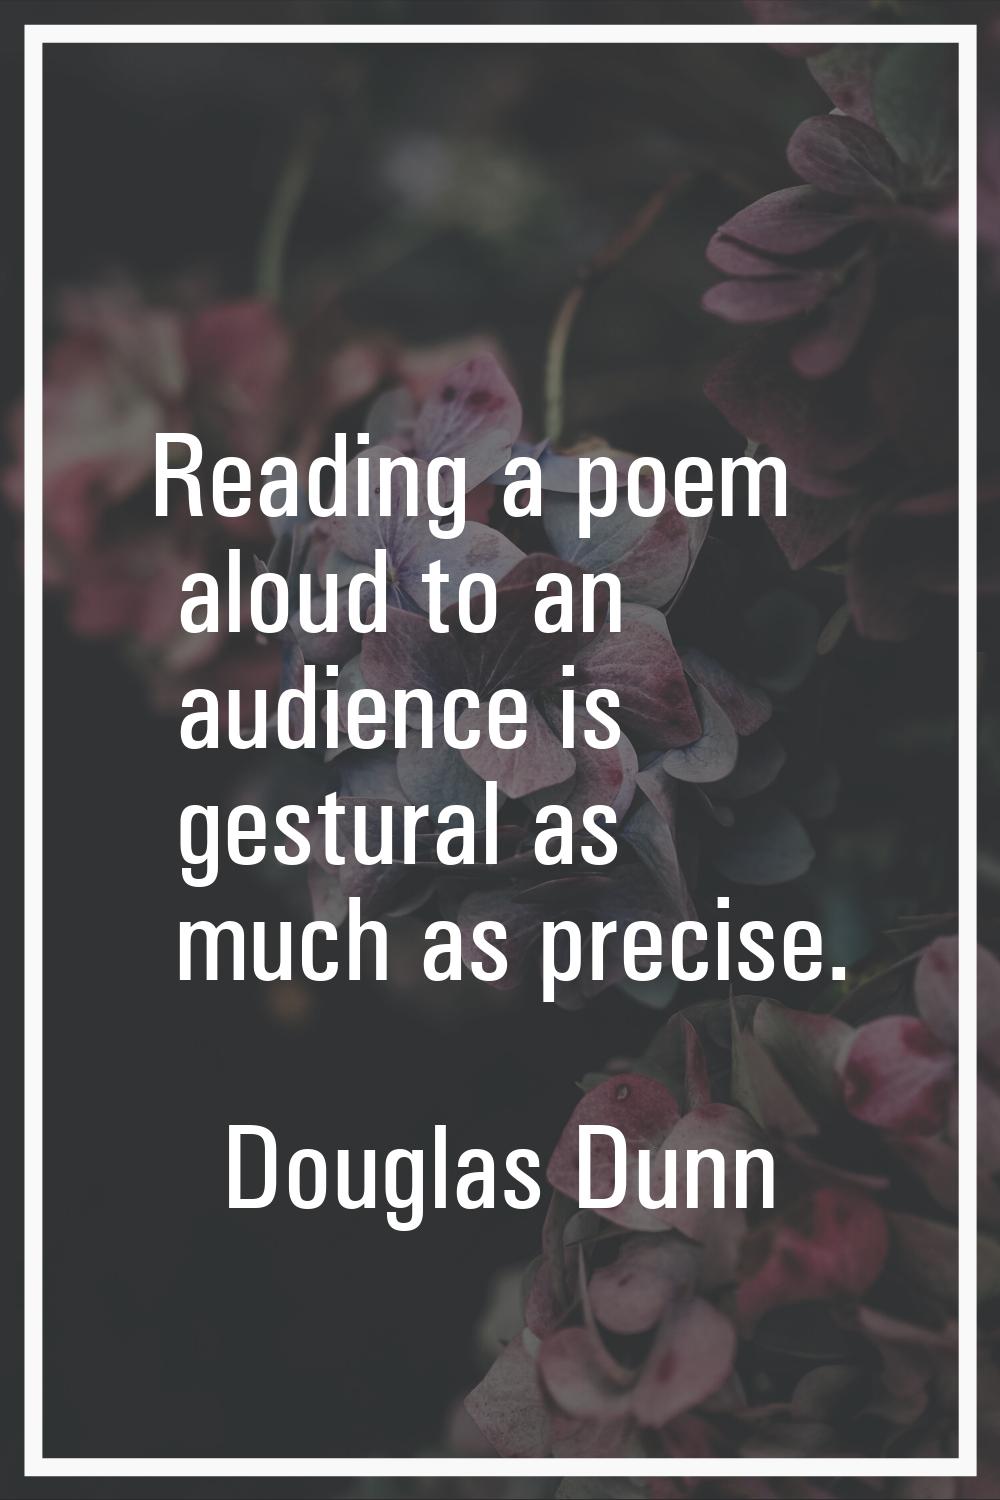 Reading a poem aloud to an audience is gestural as much as precise.